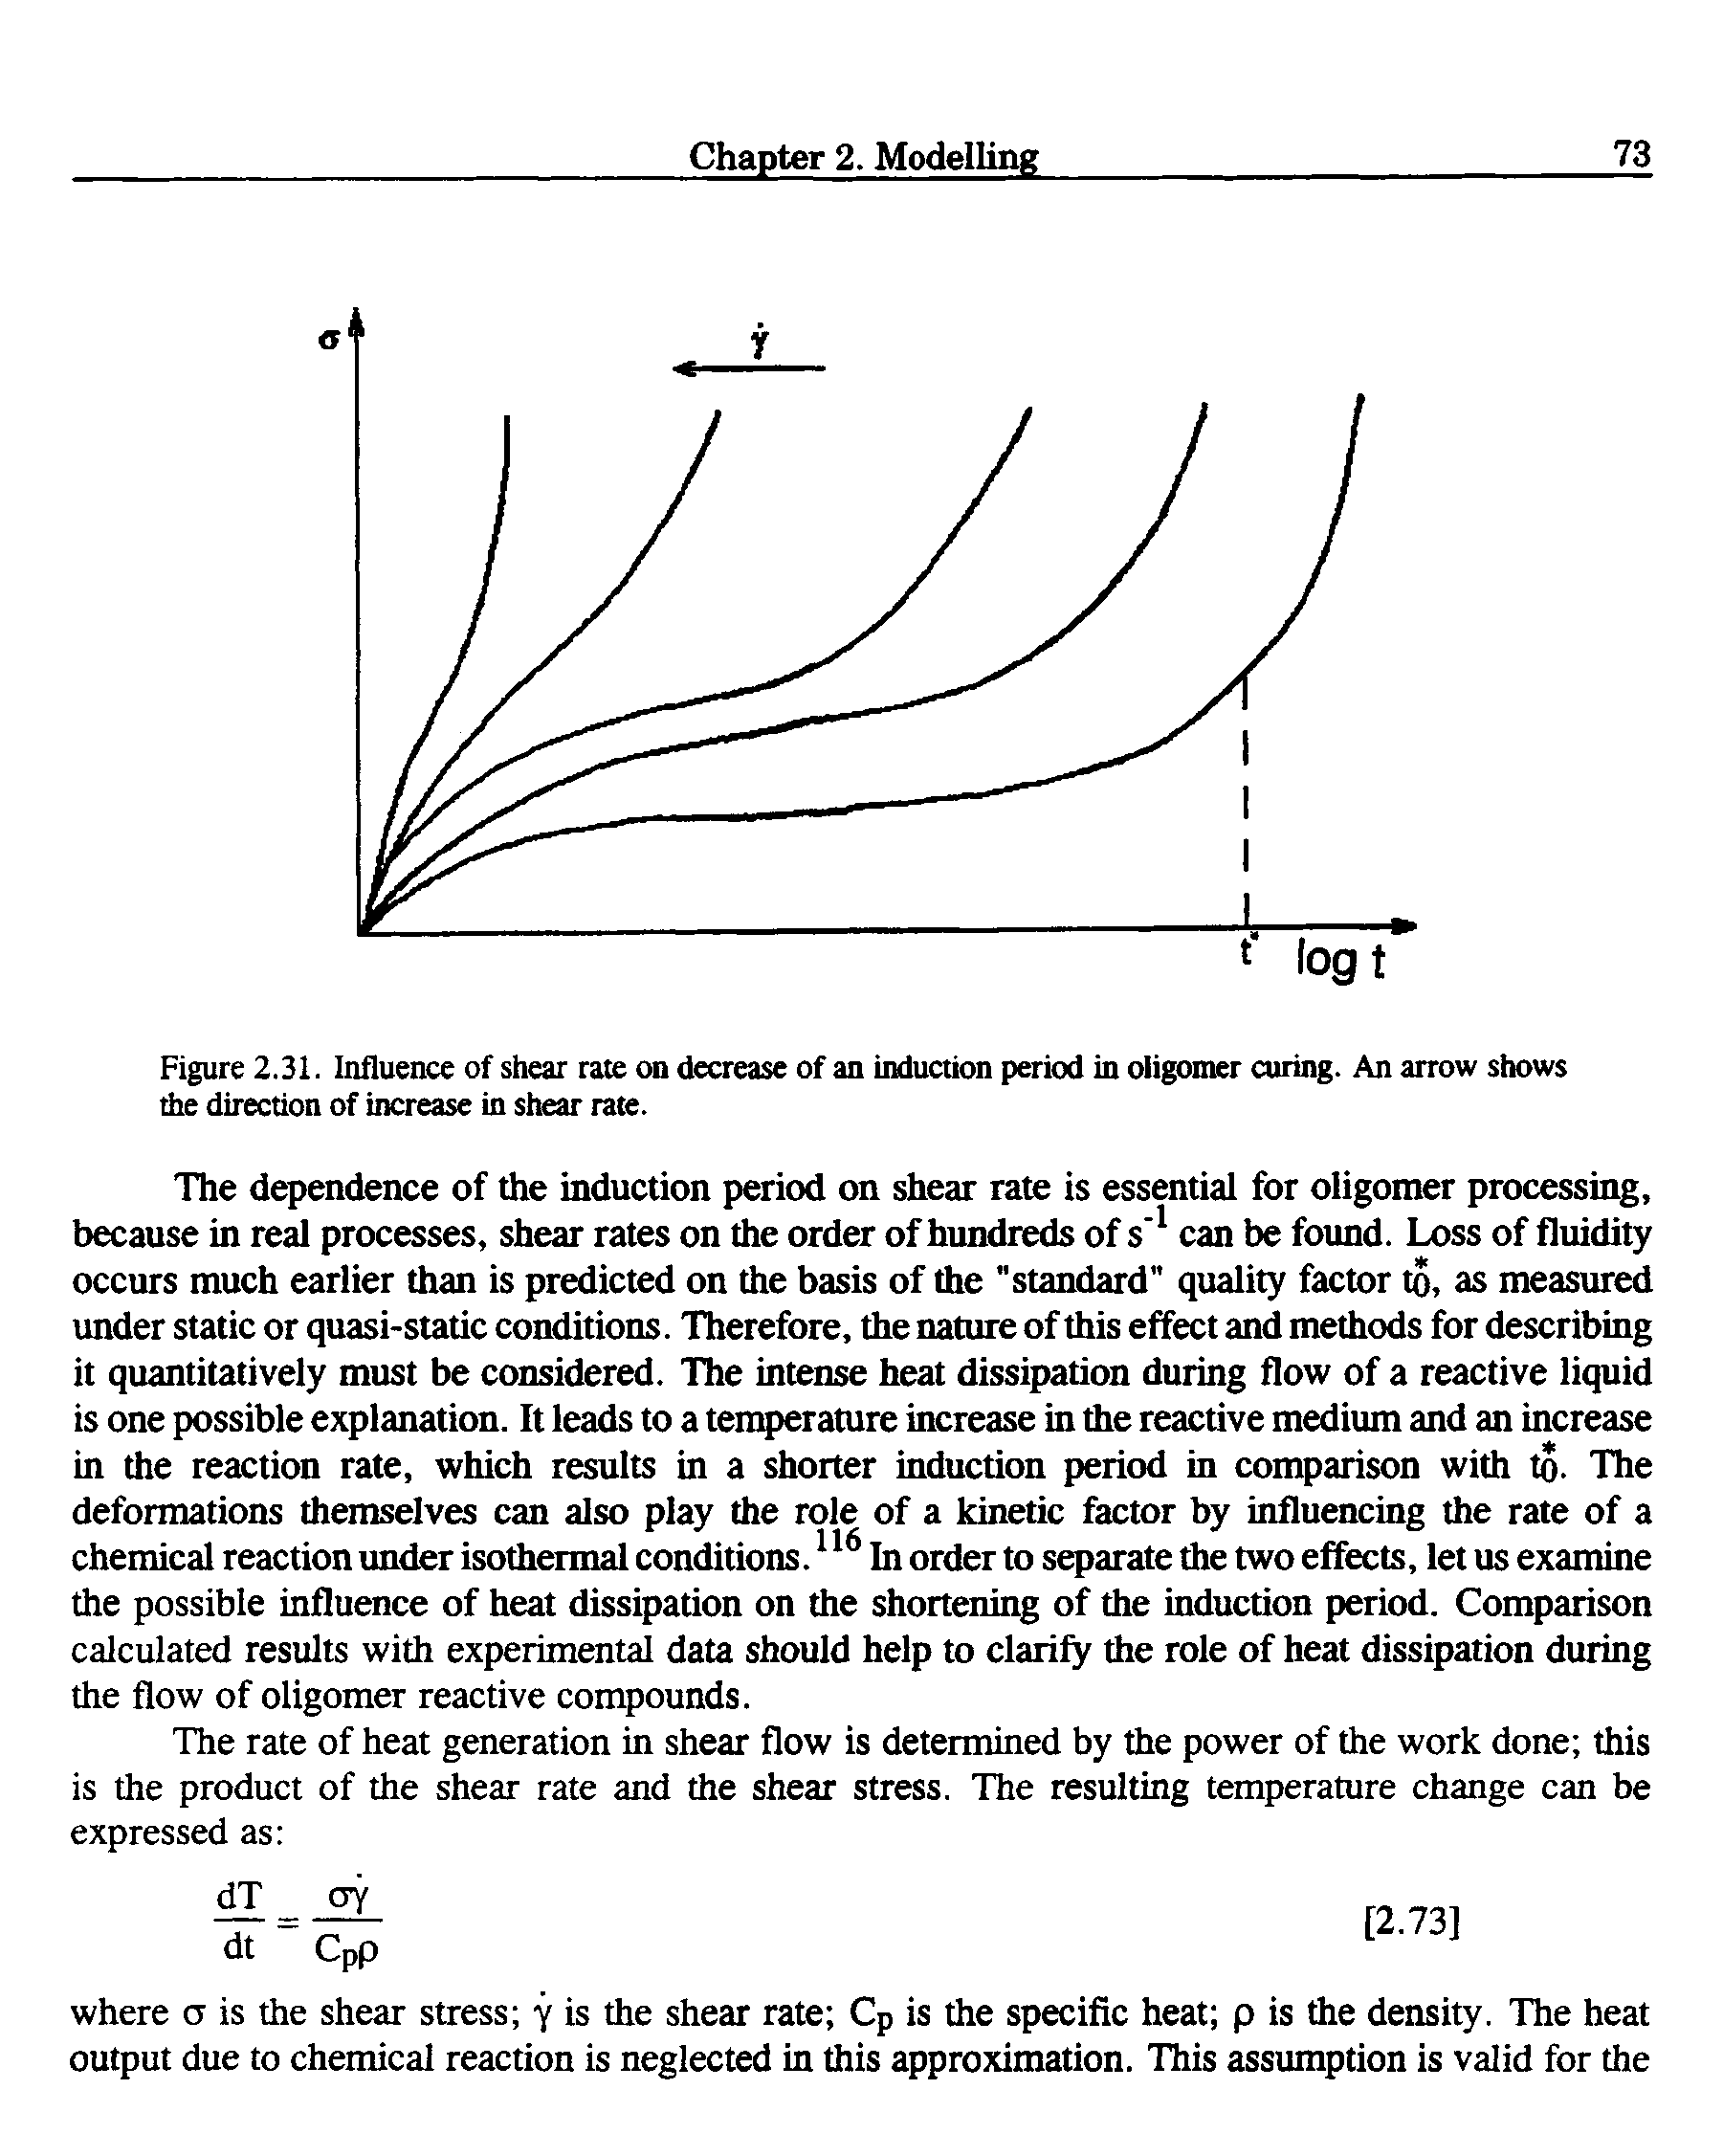 Figure 2.31. Influence of shear rate on decrease of an induction period in oligomer curing. An arrow shows the direction of increase in shear rate.